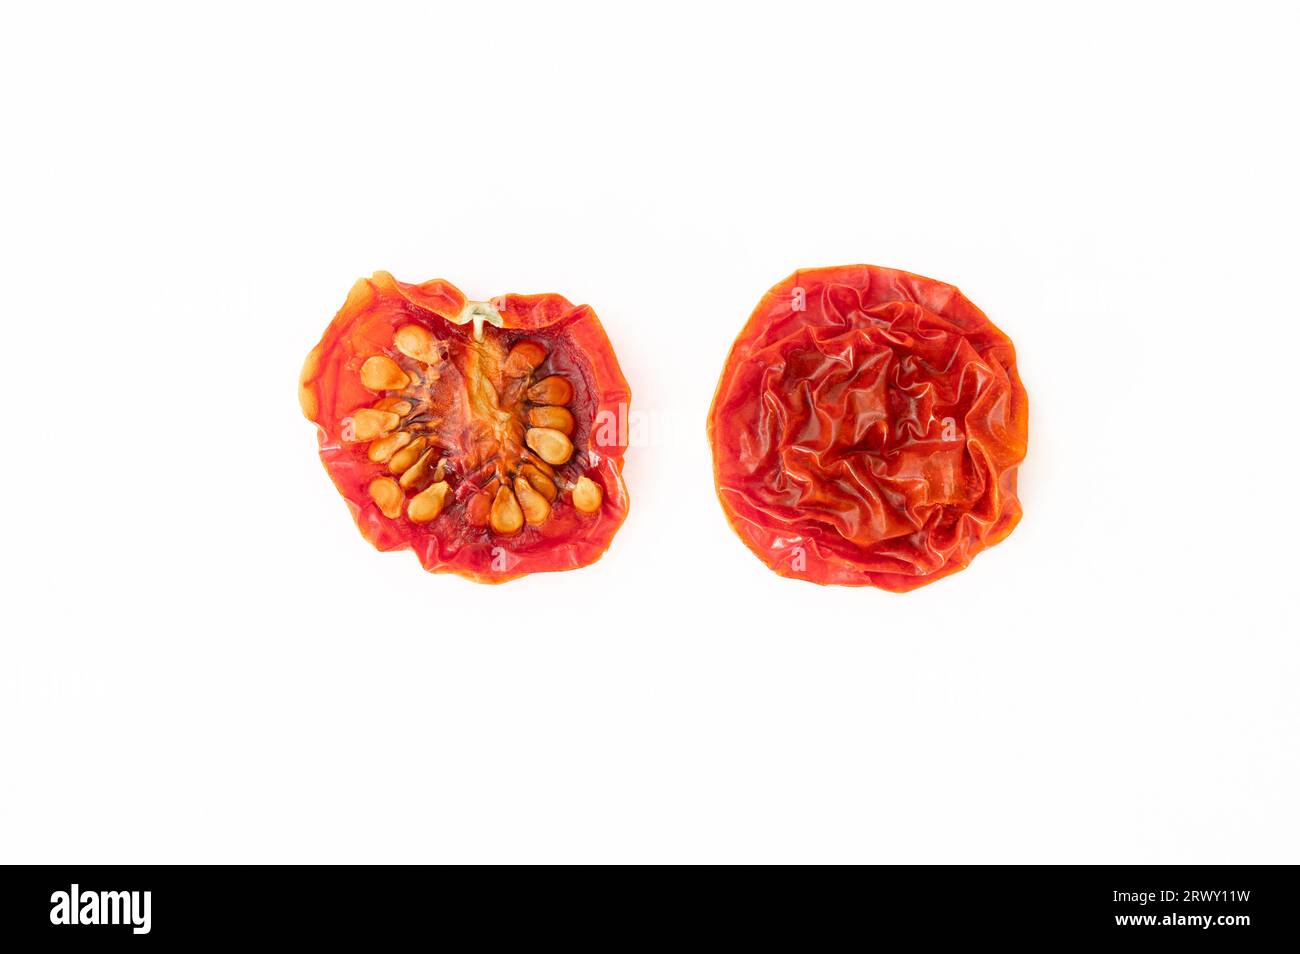 A dried cherry tomato sliced in half on white background Stock Photo